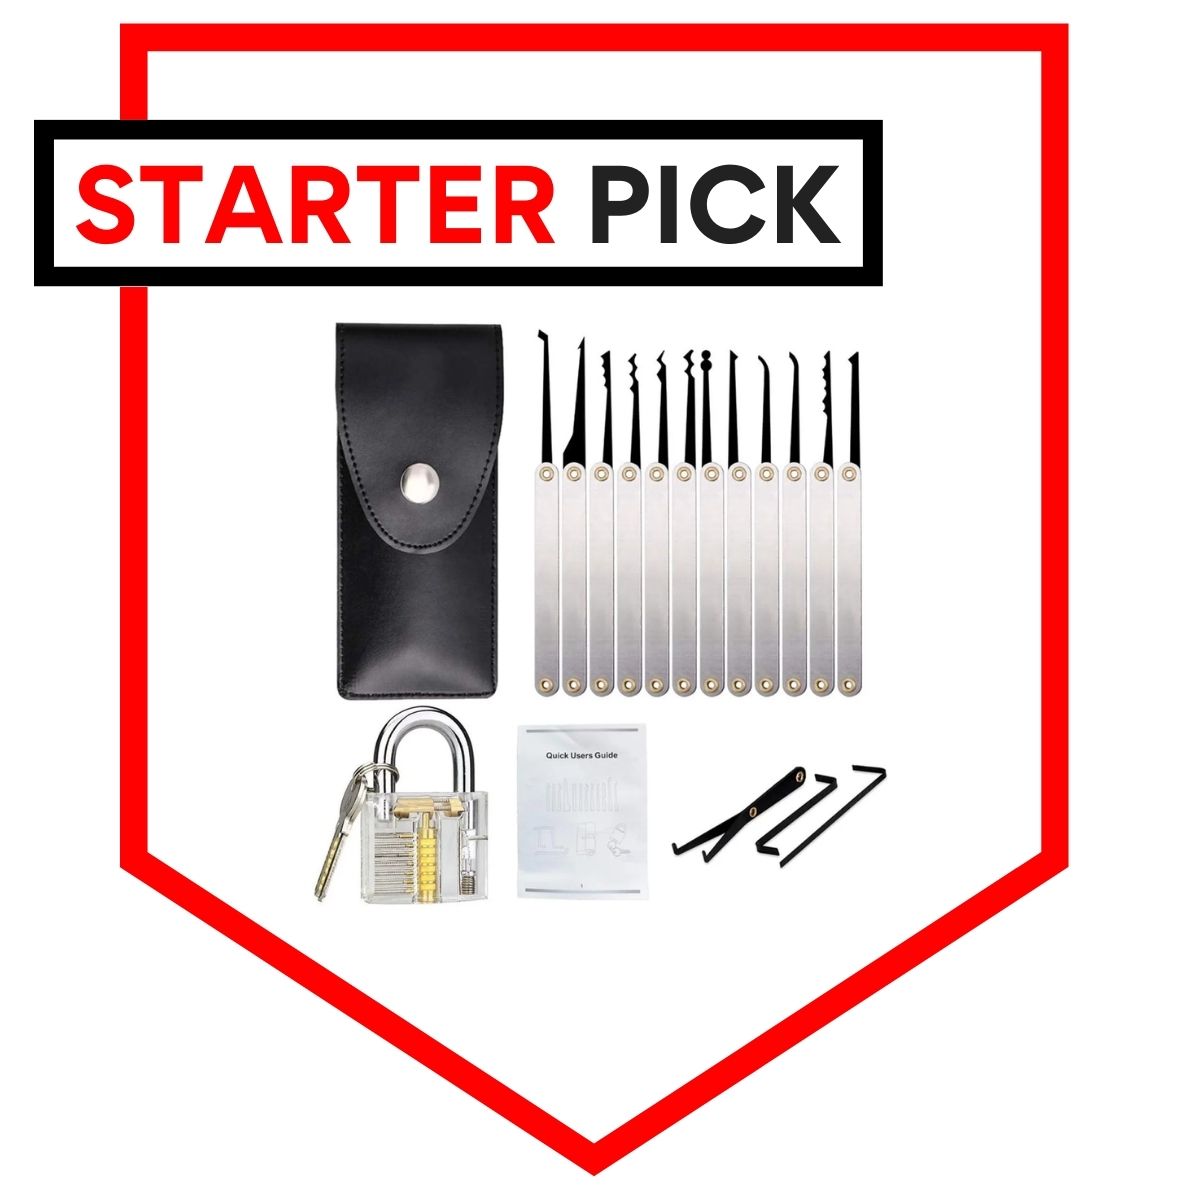 Lock Pick Starter Set with Clear Lock for Survival and Prepping